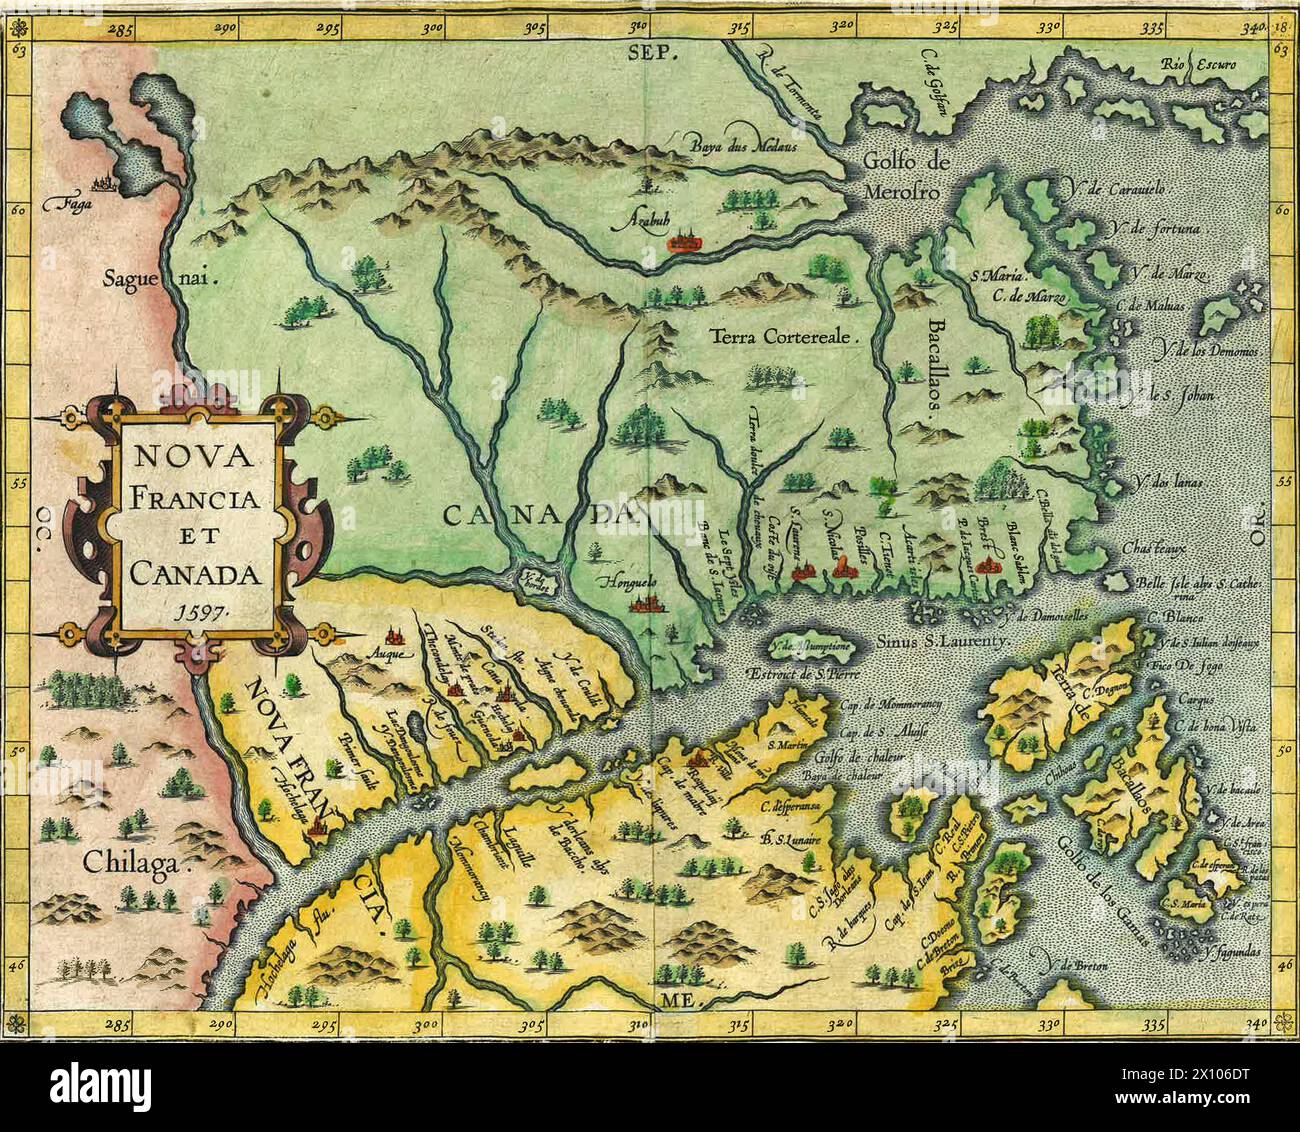 Vintage Archive Map of Canada and New France {Nova Francia et Canada}.  1597 Stock Photo